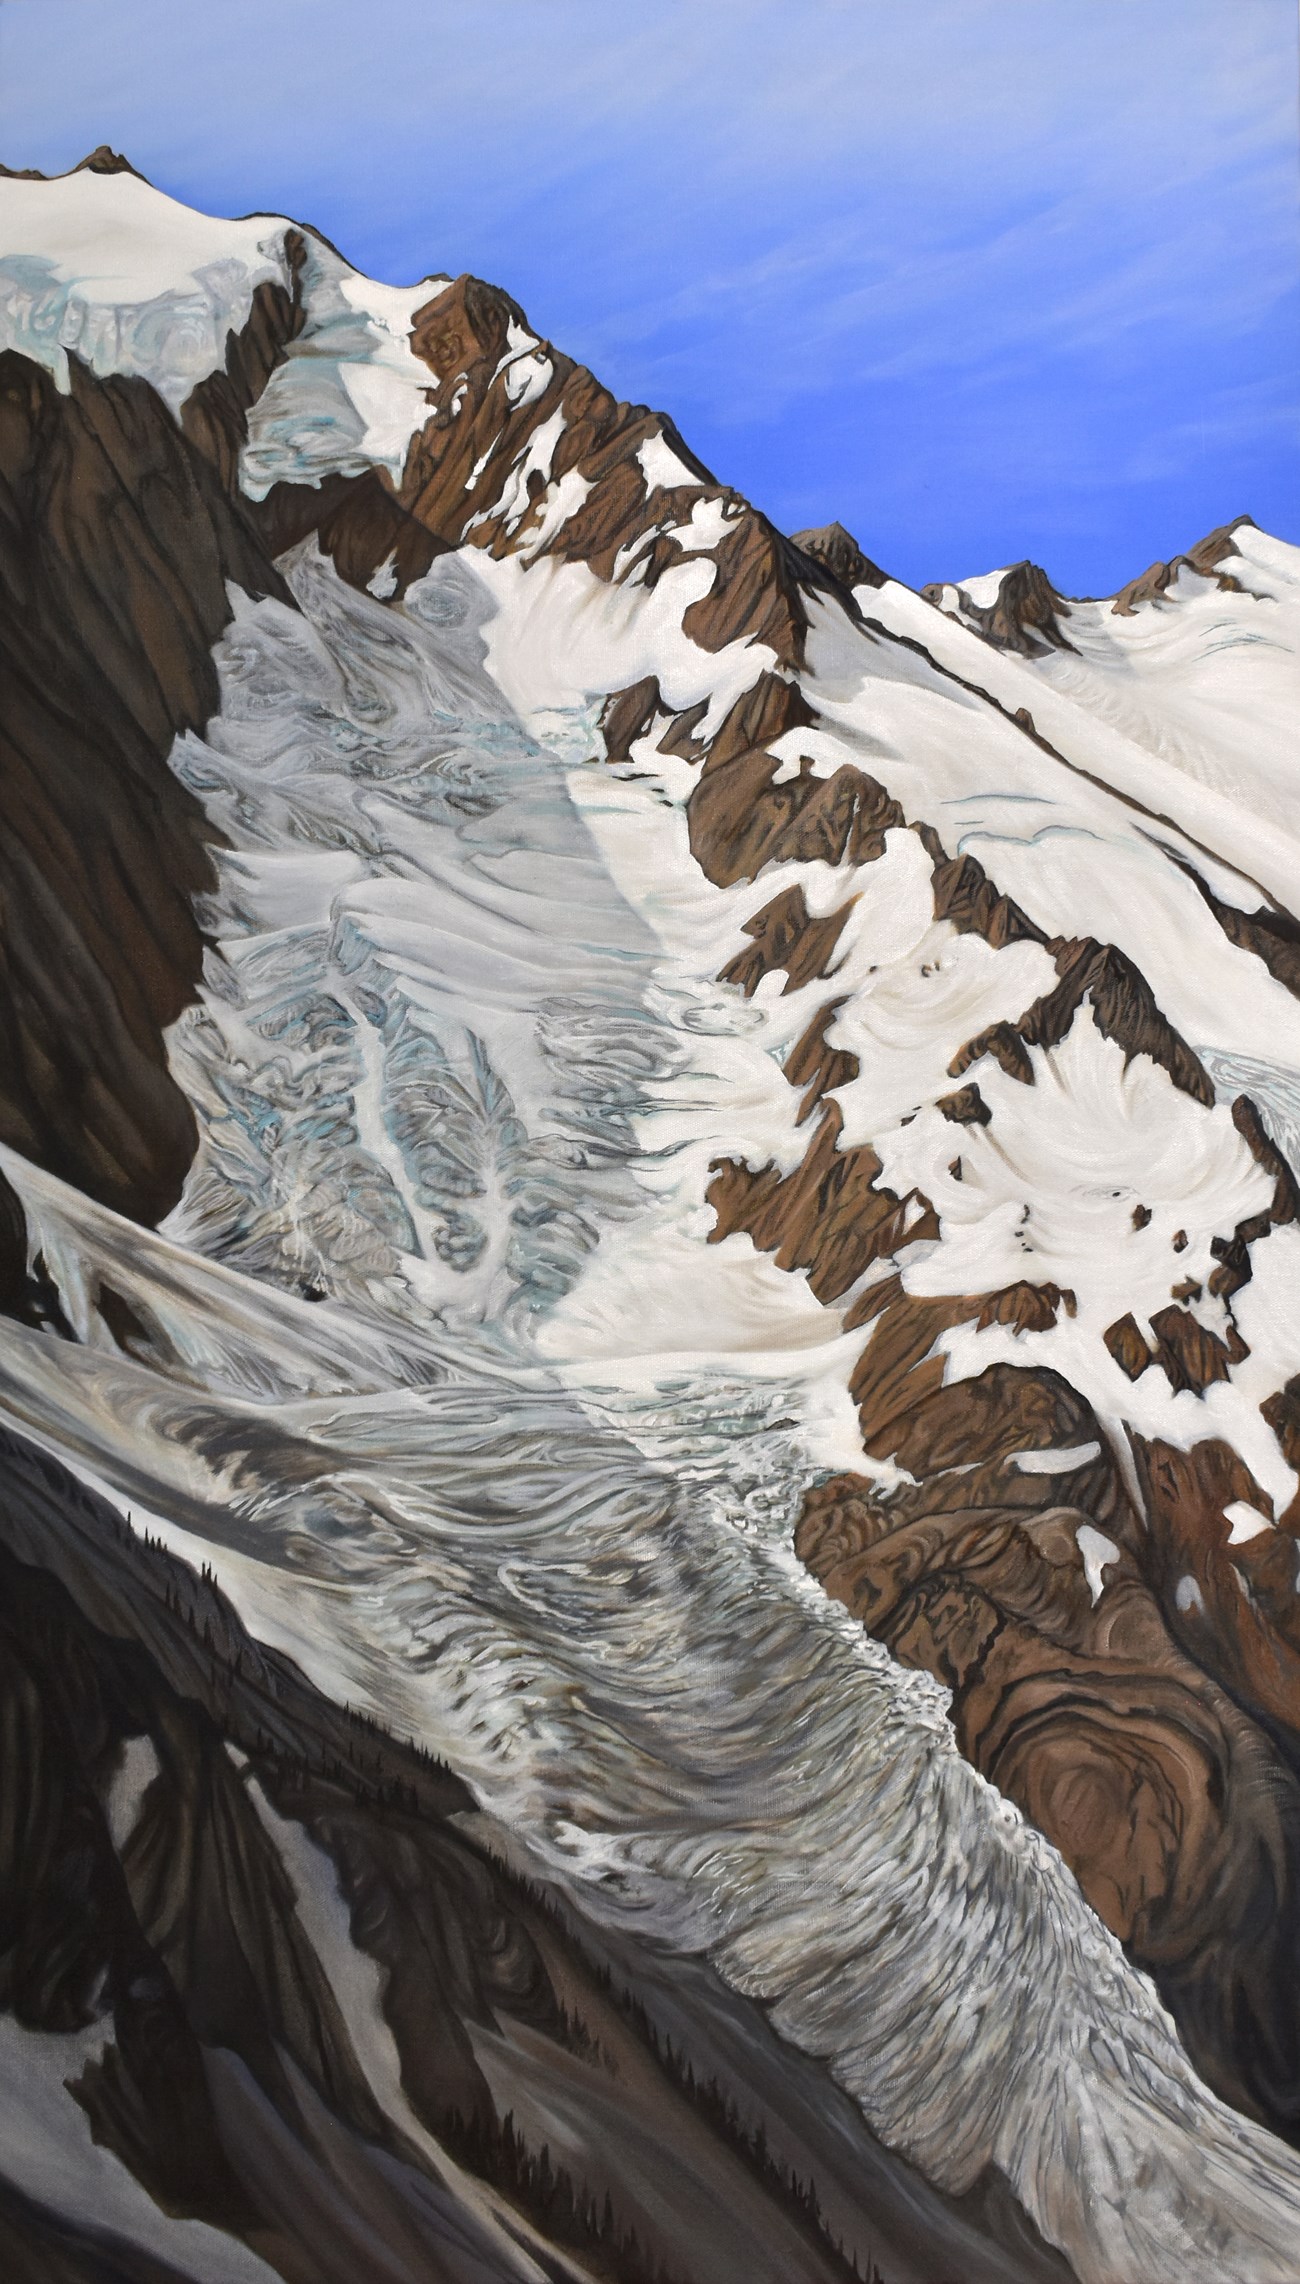 A painting of a glacier, its surface rippled and folded as it tucks into the rocky side of a mountain.